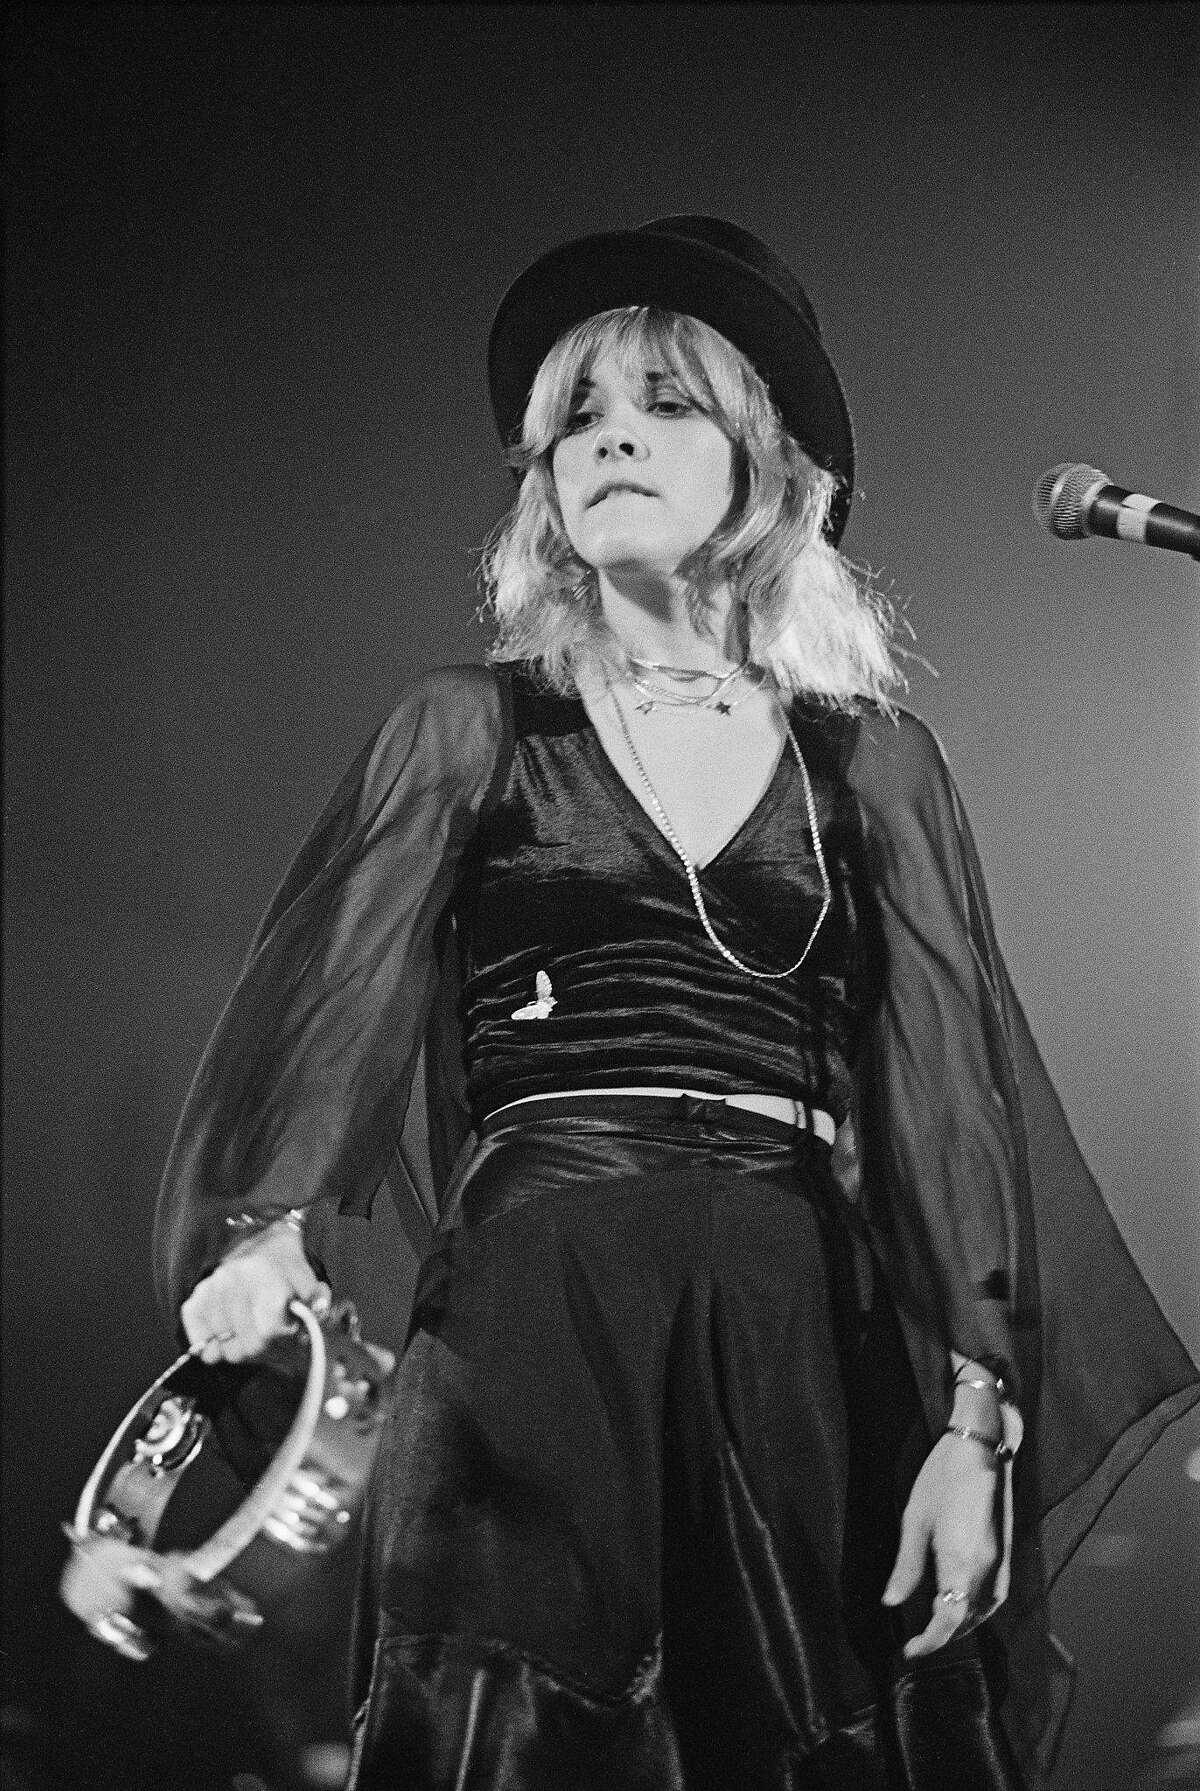 Singer Stevie Nicks of British-American rock band Fleetwood Mac performs live on stage at Yale Coliseum in New Haven, Connecticut, USA, on November 20, 1975.